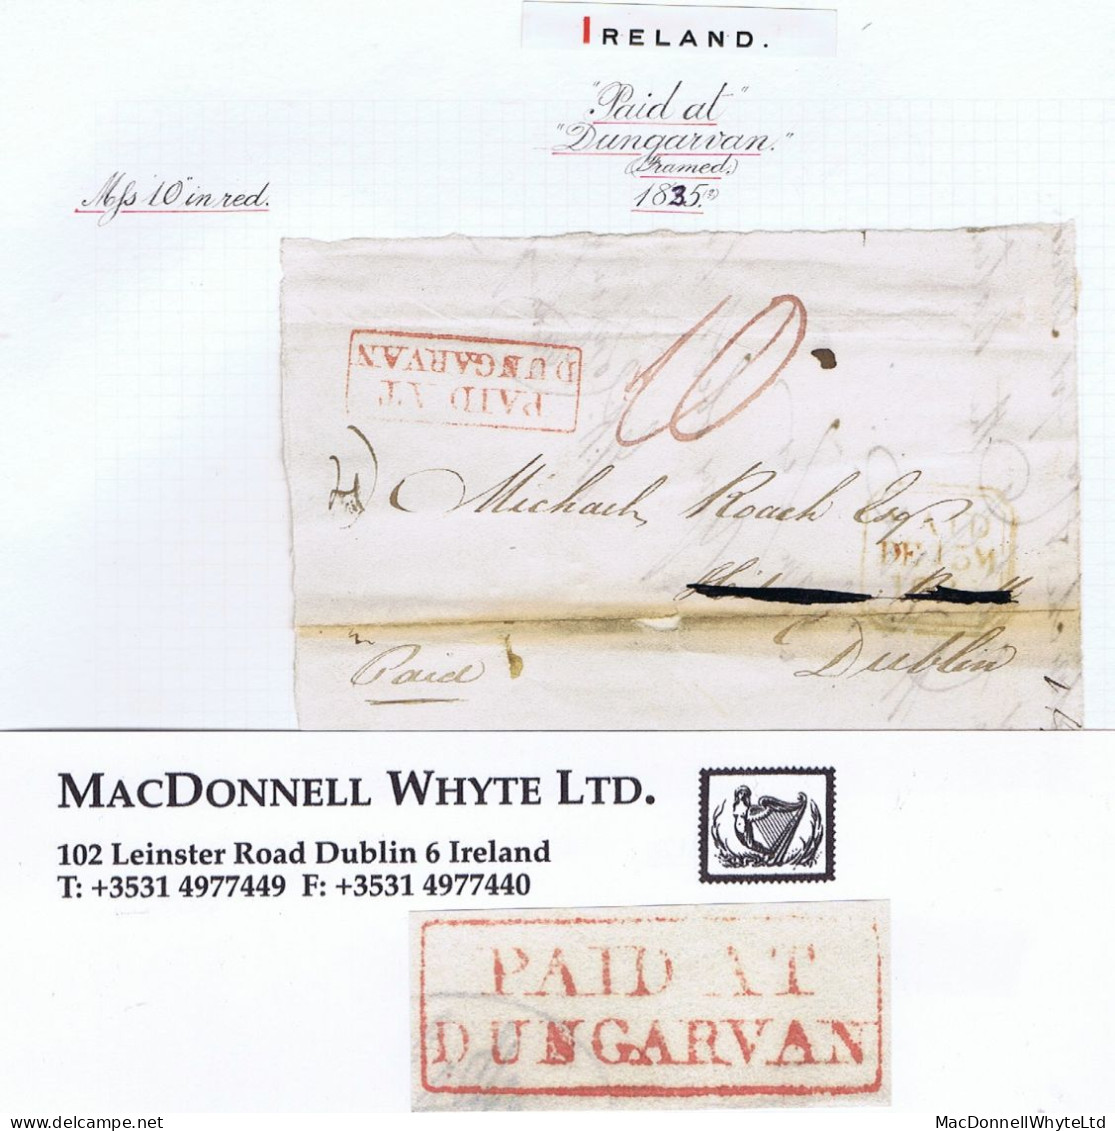 Ireland Waterford 1835 Front Only To Dublin At "10" With Boxed PAID AT/DUNGARVAN, Clear Strike In Red - Prephilately